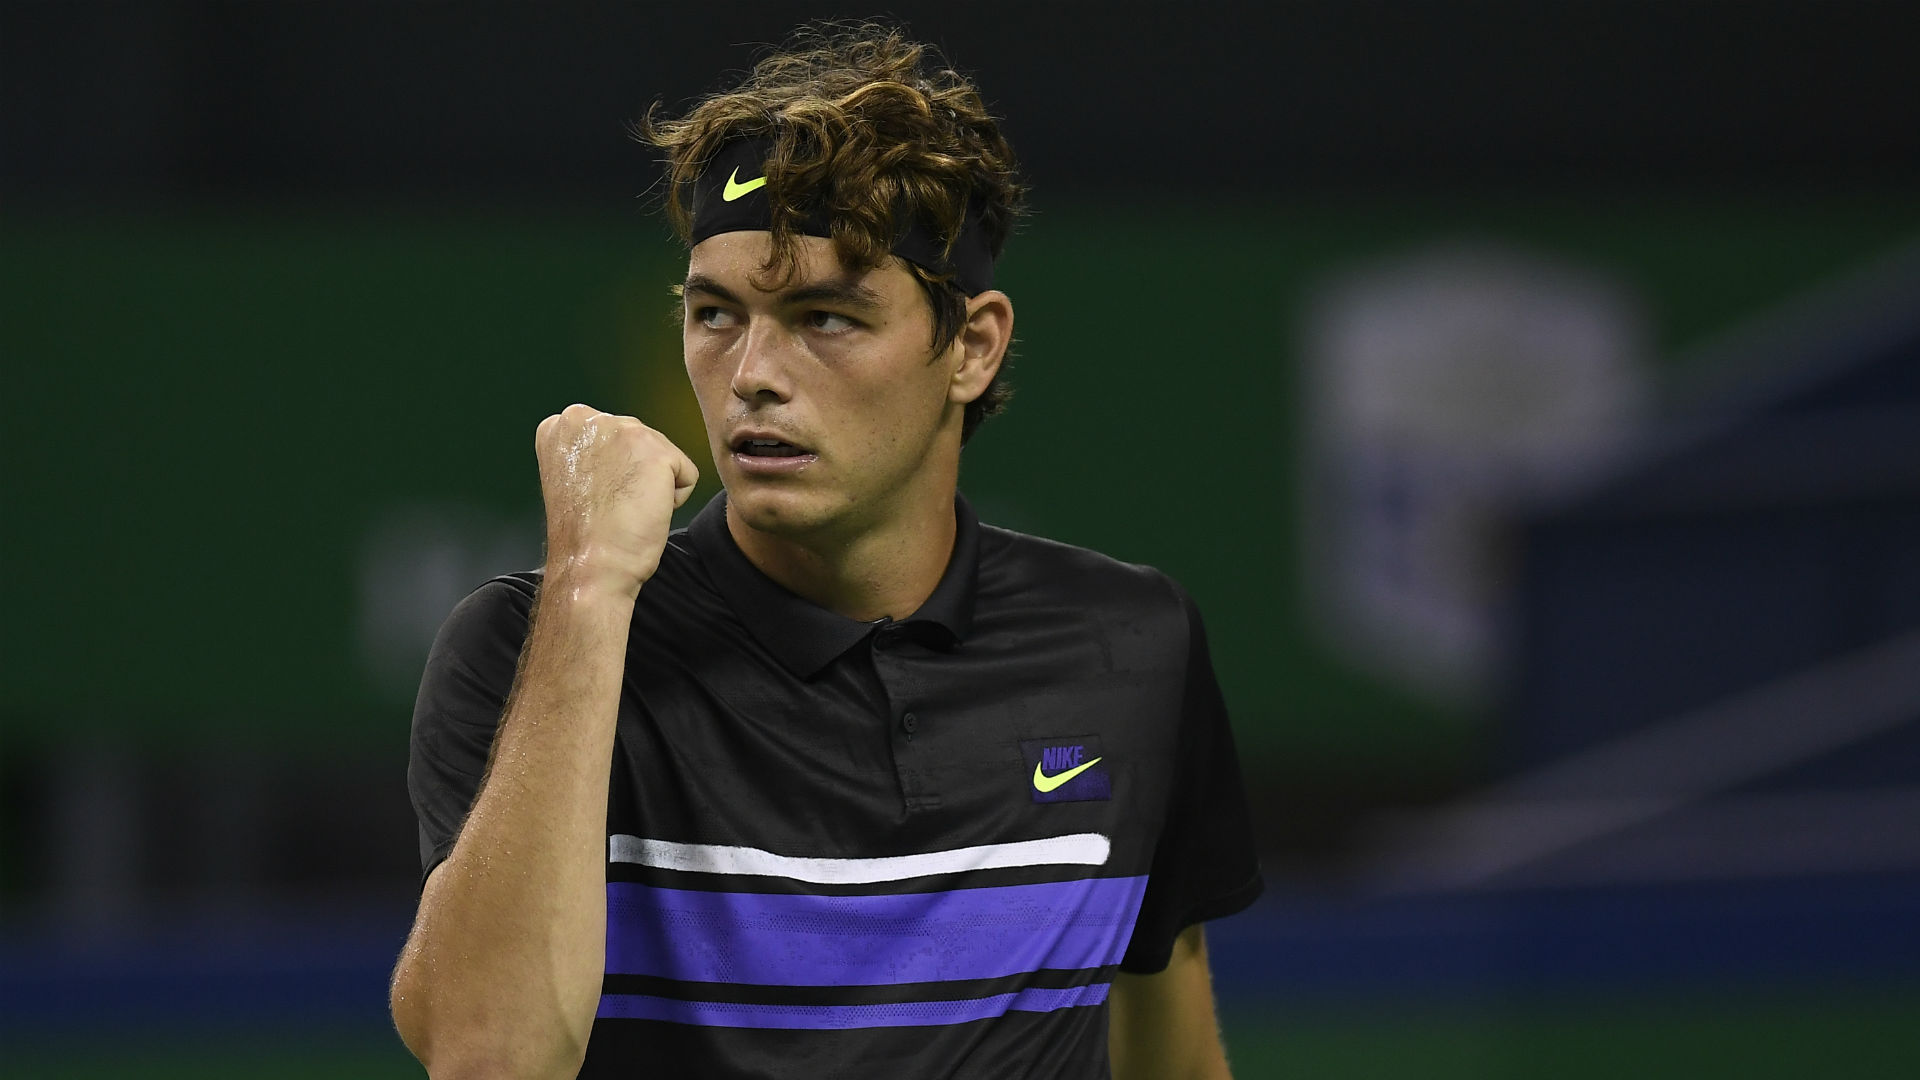 Taylor Fritz claimed the biggest win of his career by ranking, defeating the previously in-form Alexander Zverev.